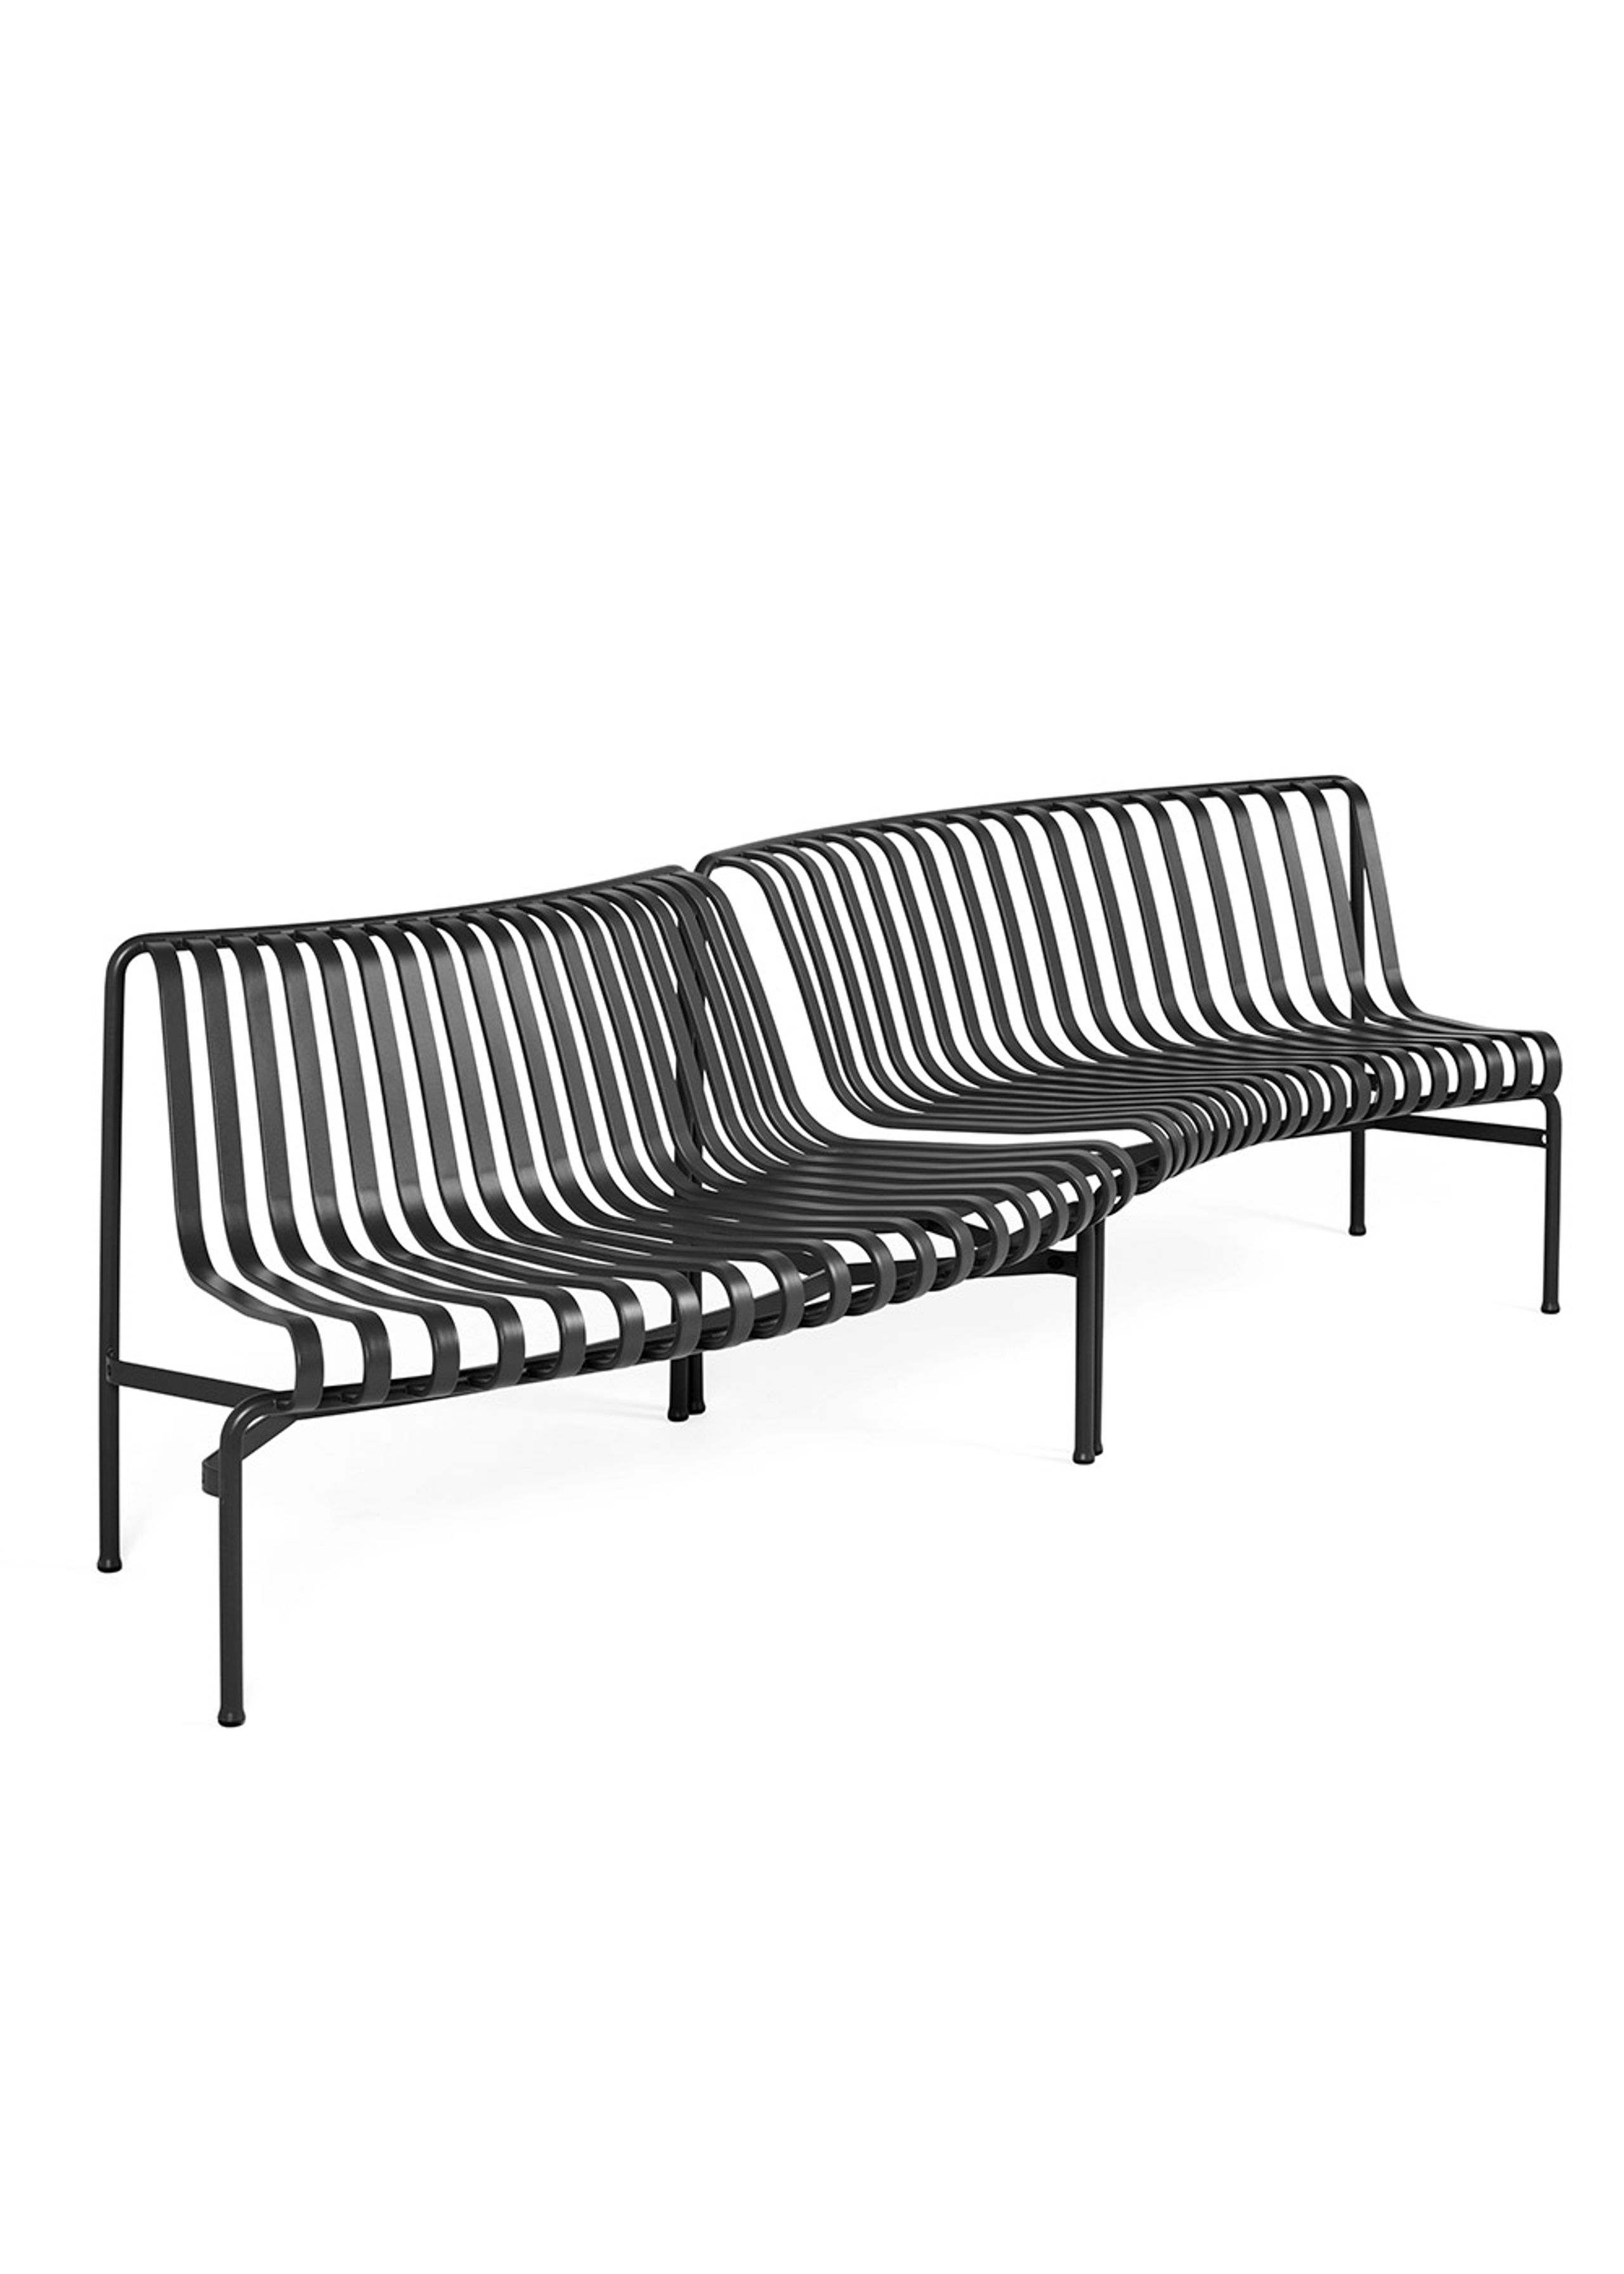 HAY - Palissade park dining bench in-out - Gartenbank - Anthracite